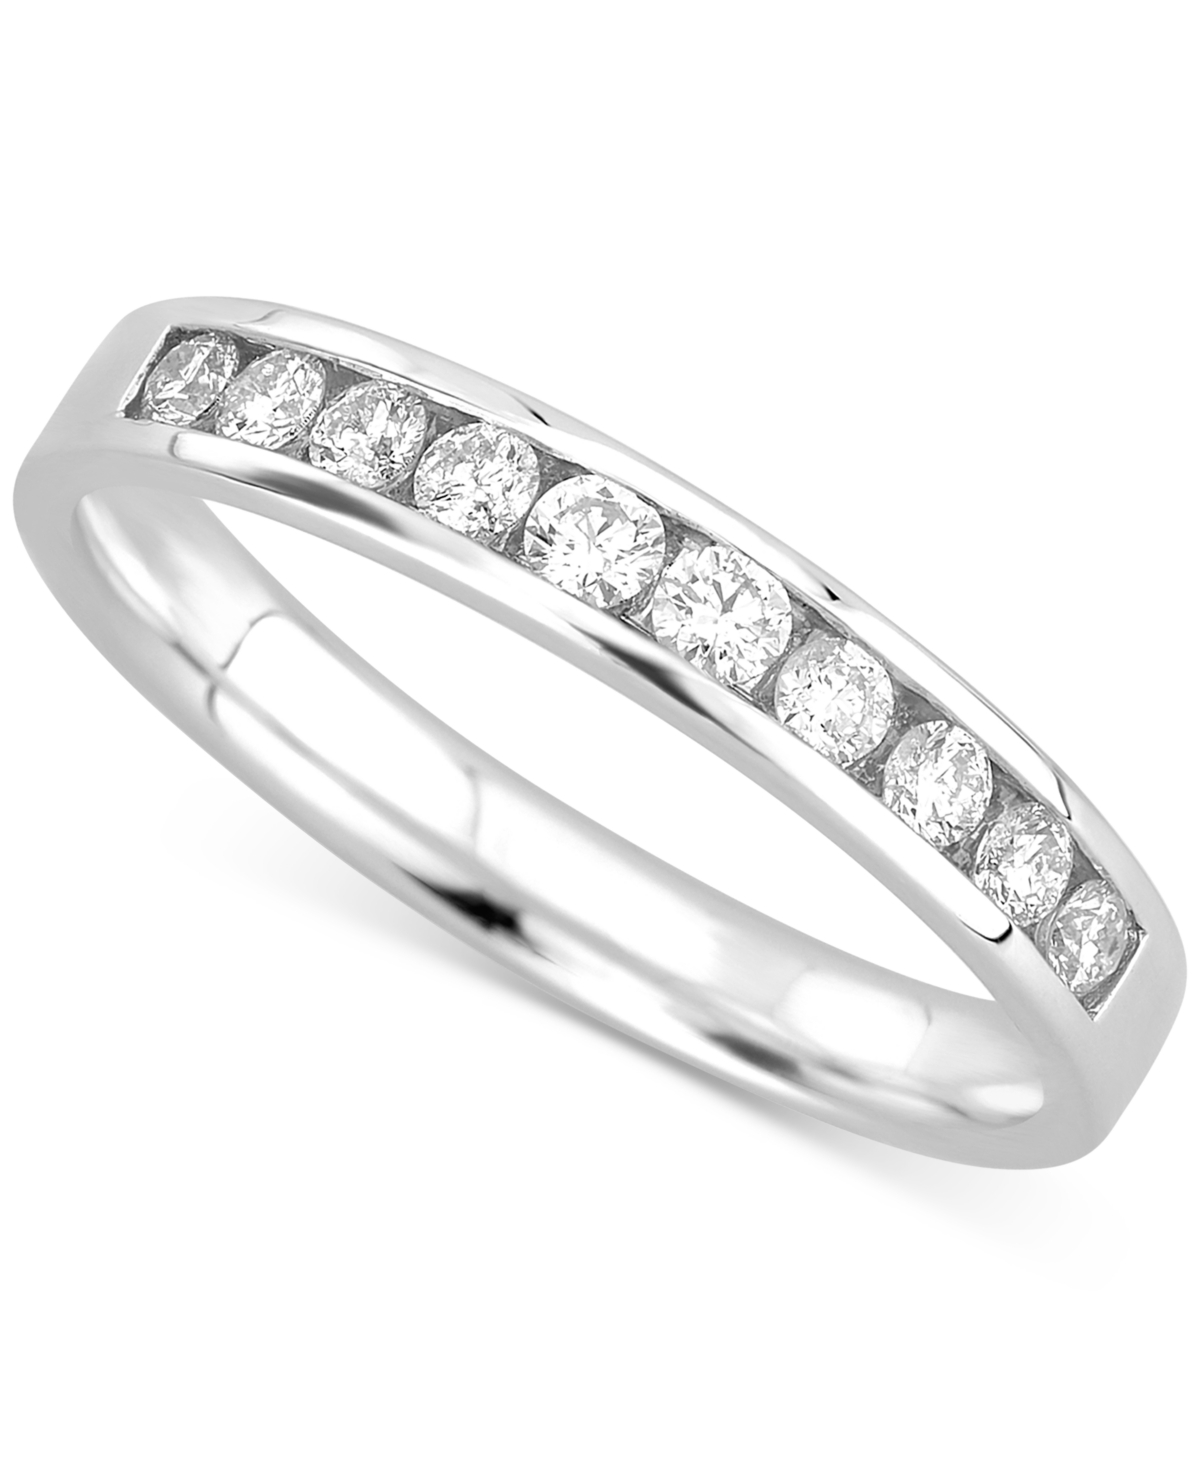 MACY'S DIAMOND CHANNEL-SET BAND (1/2 CT. T.W.) IN 14K WHITE GOLD